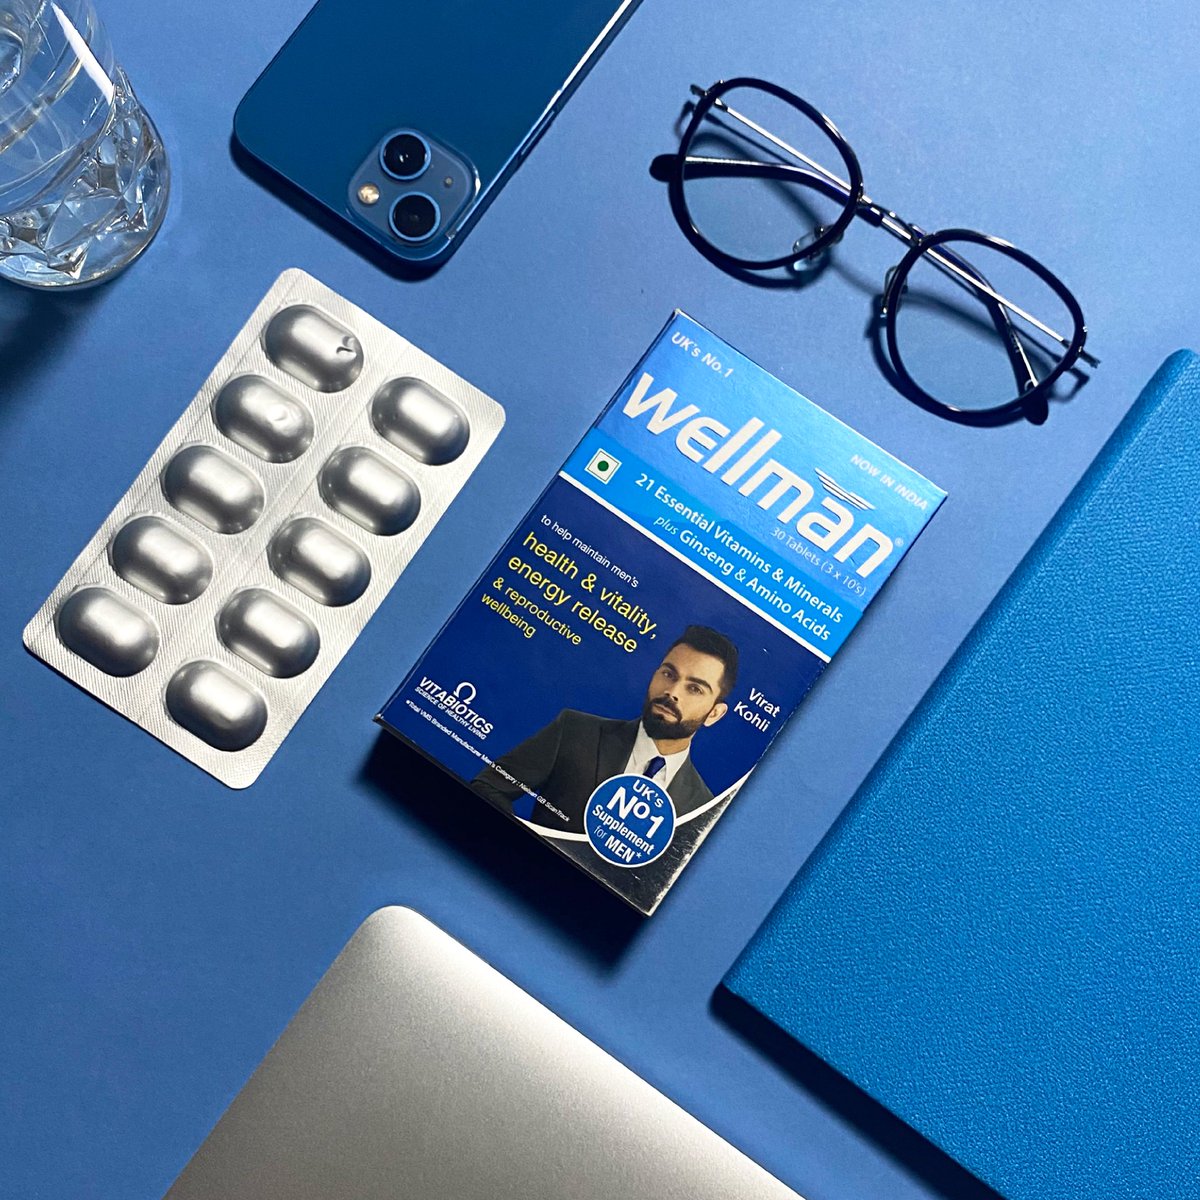 Every day is a chance to be better. Elevate your wellness game with Wellman, scientifically crafted to help you thrive. 🌟

#wellman #BetterEveryDay #ElevateWellness #WellmanThrive #ScientificWellness #ThriveWithWellman #WellnessJourney #HealthyLiving #OptimalHealth  #vitabiotics